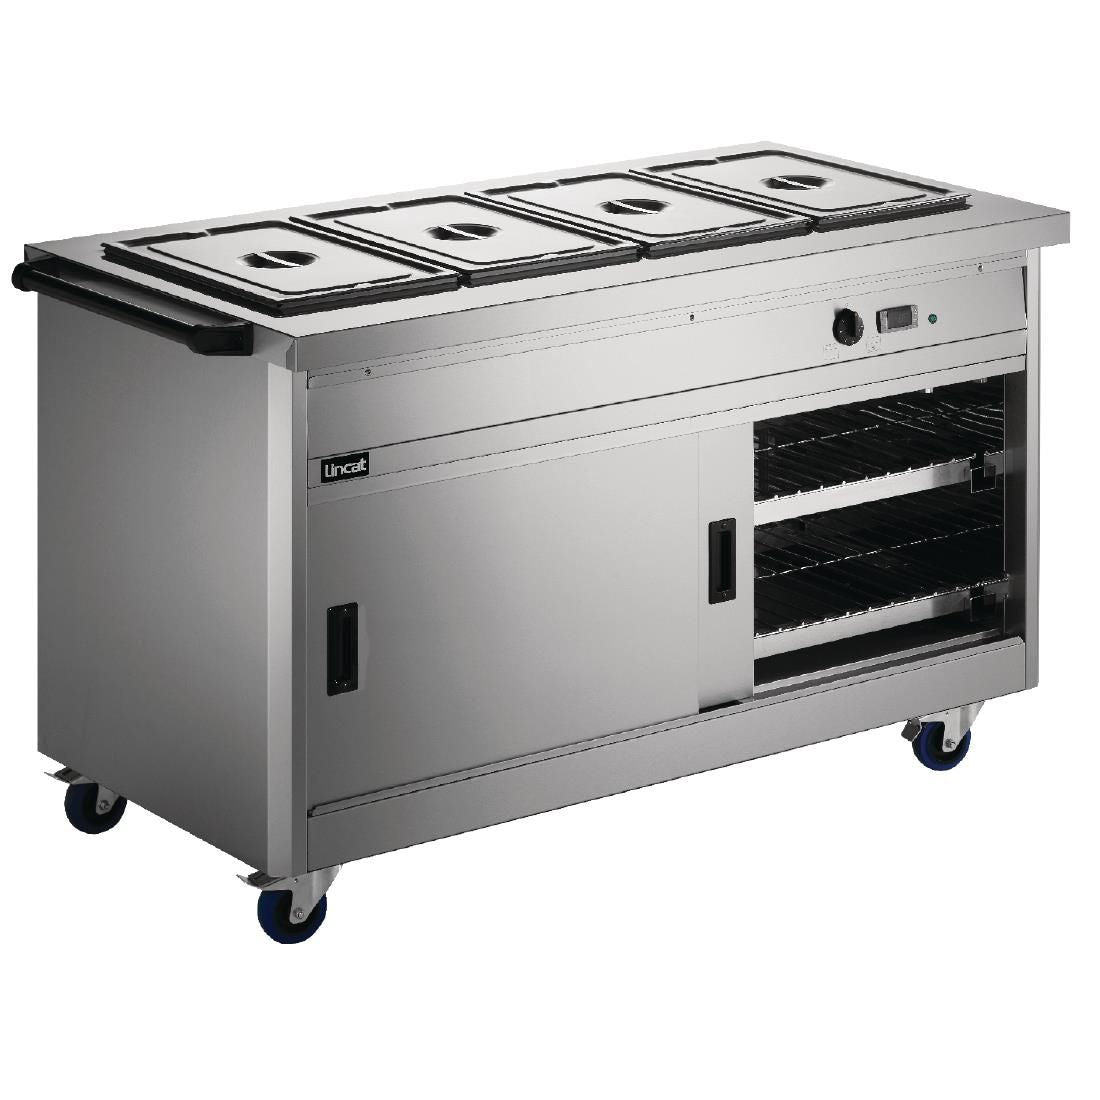 GF371 Lincat Panther Hot Cupboard and Bain Marie Top P8B4 JD Catering Equipment Solutions Ltd